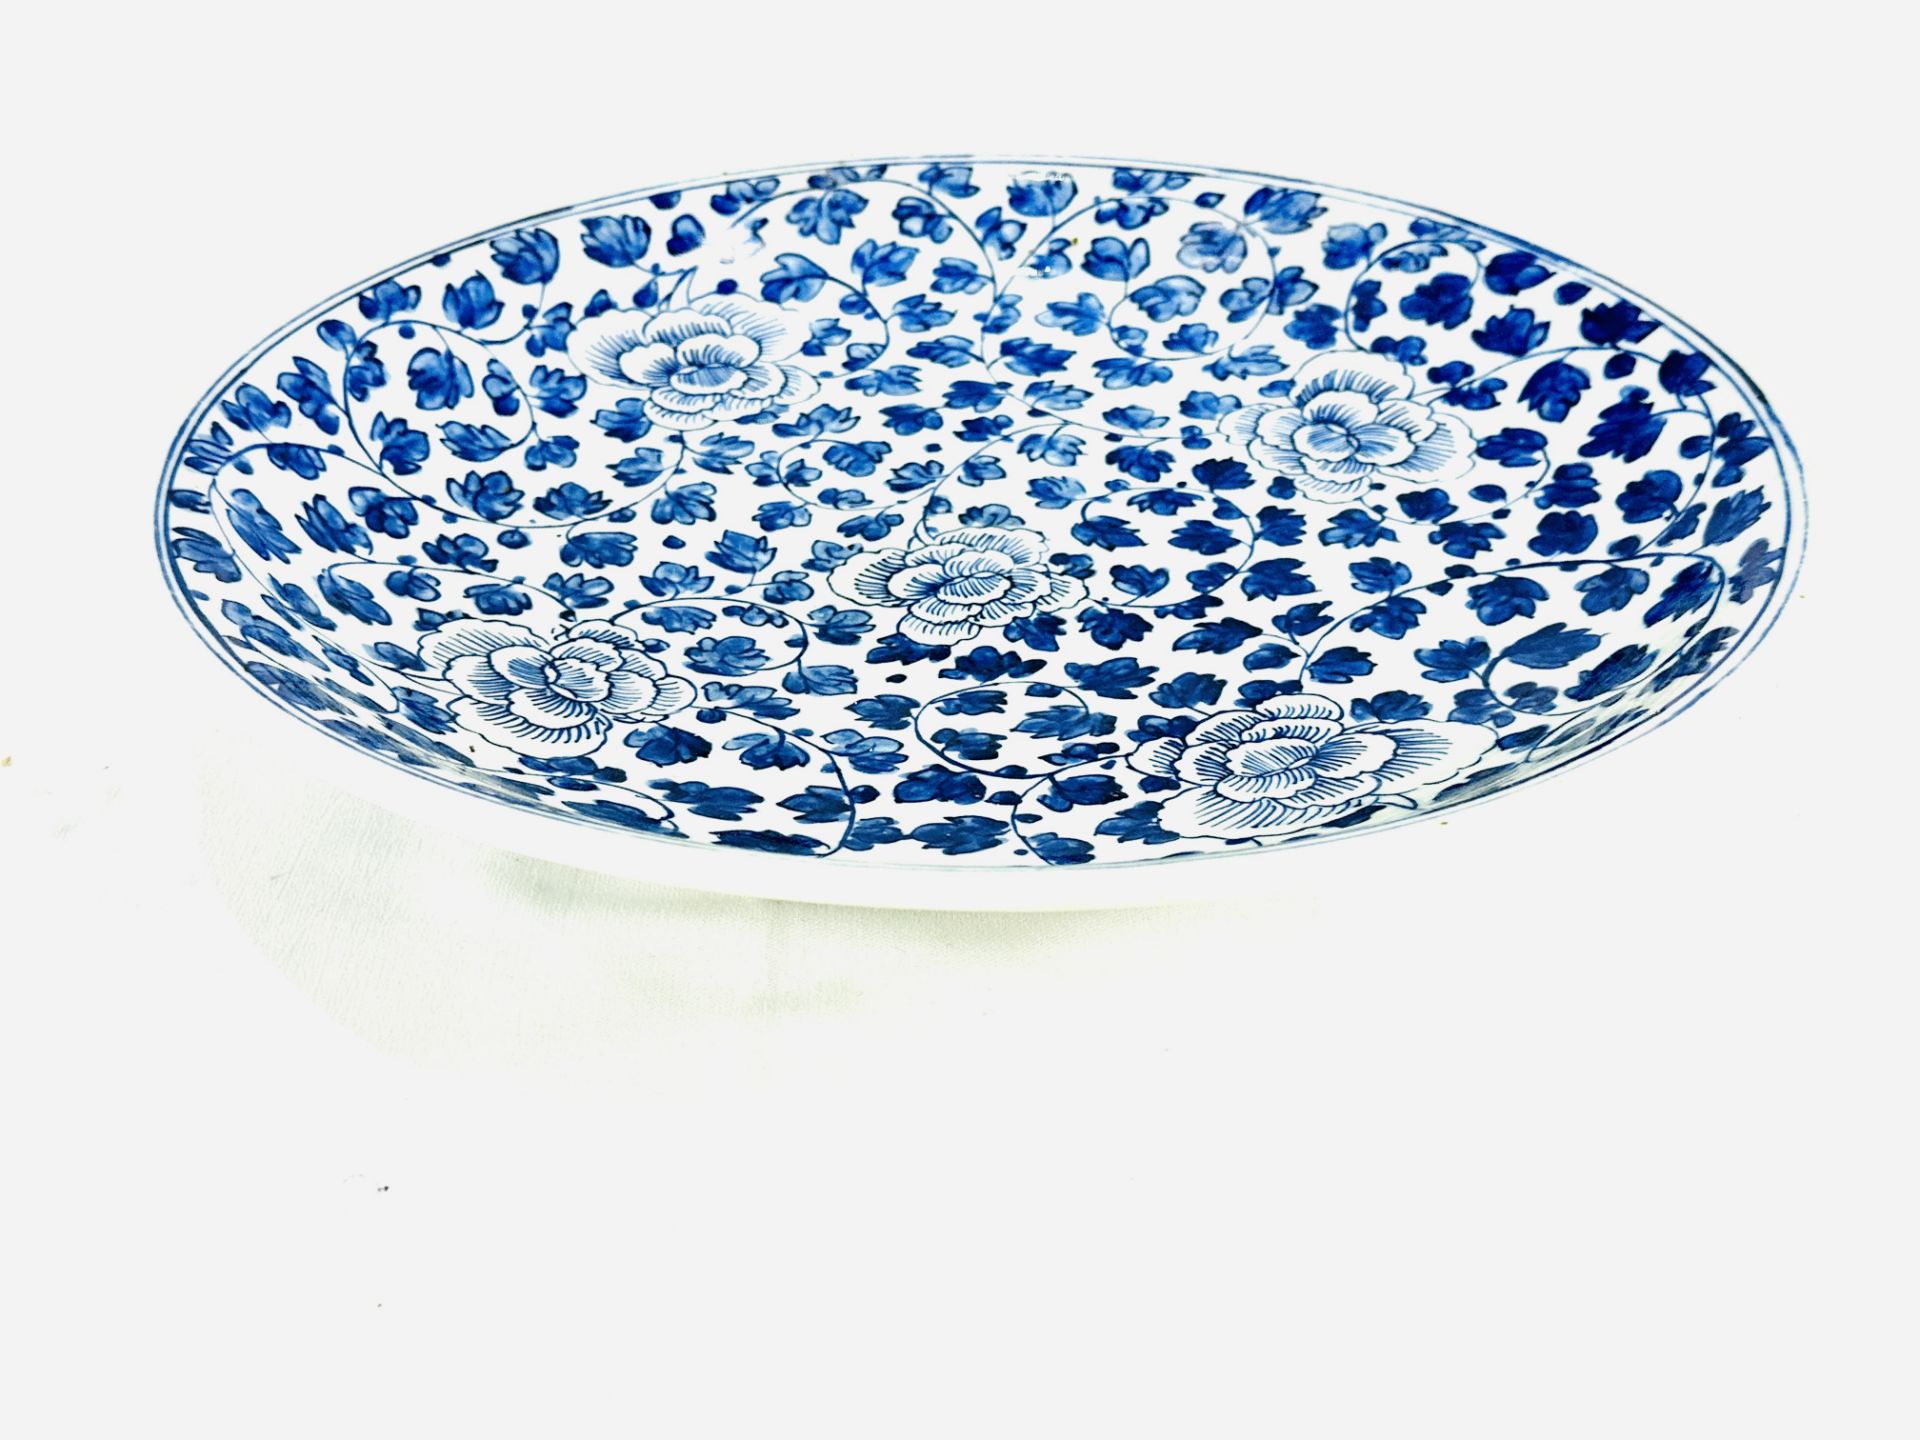 Blue and white Oriental plate - Image 2 of 4